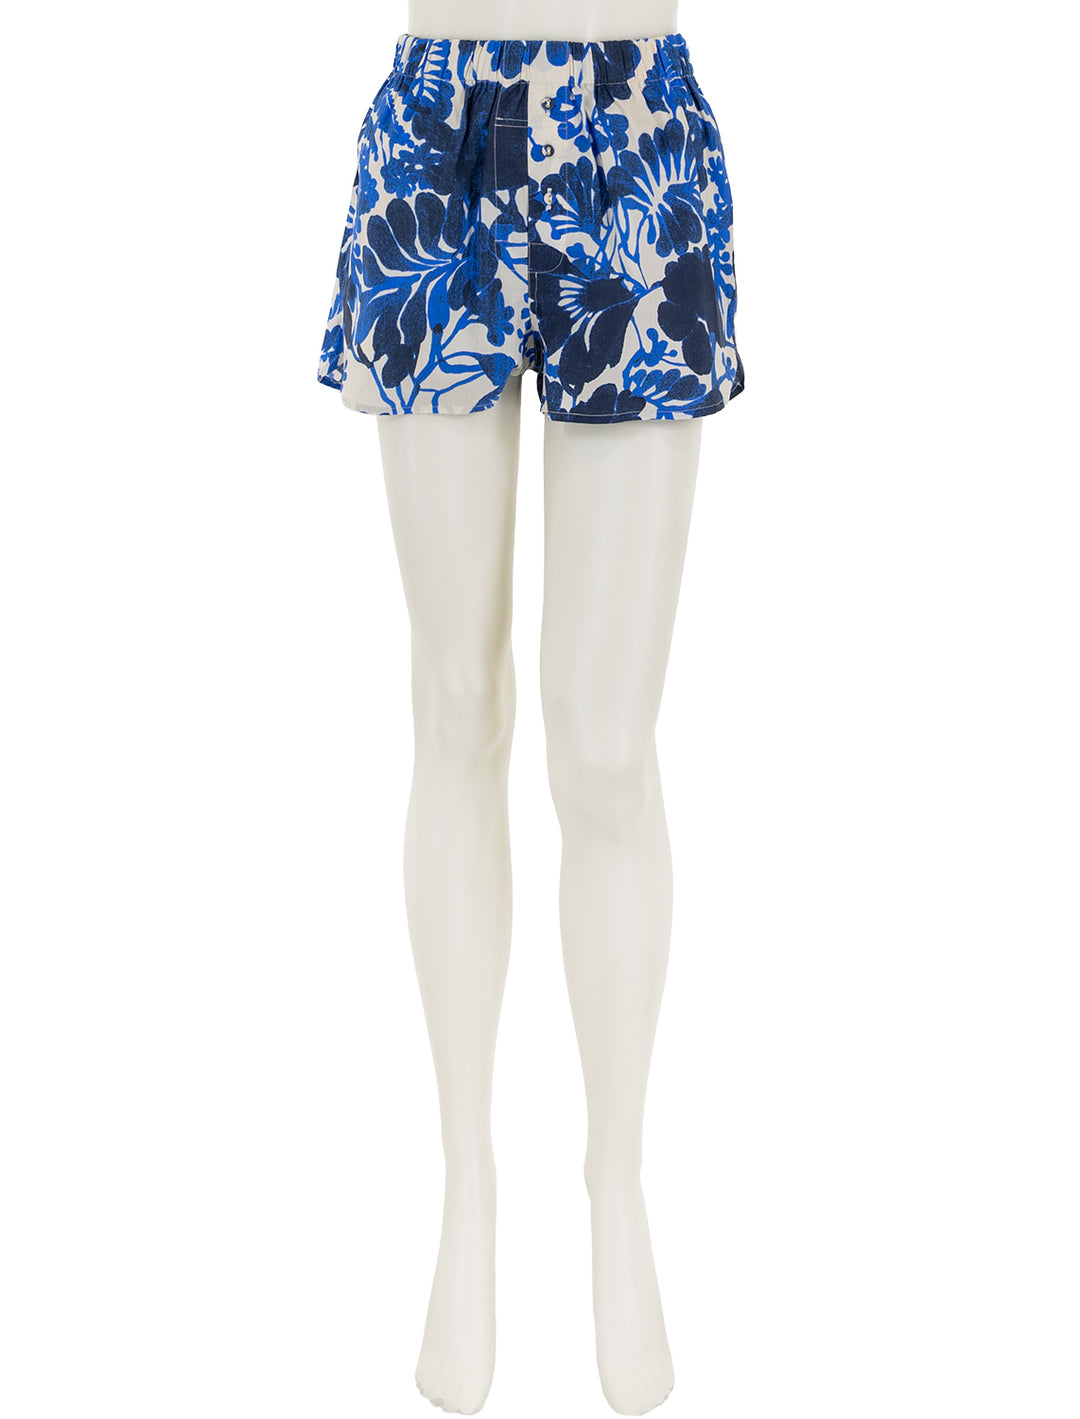 Front view of Cara Cara's brooks shorts in evening mill reef print.